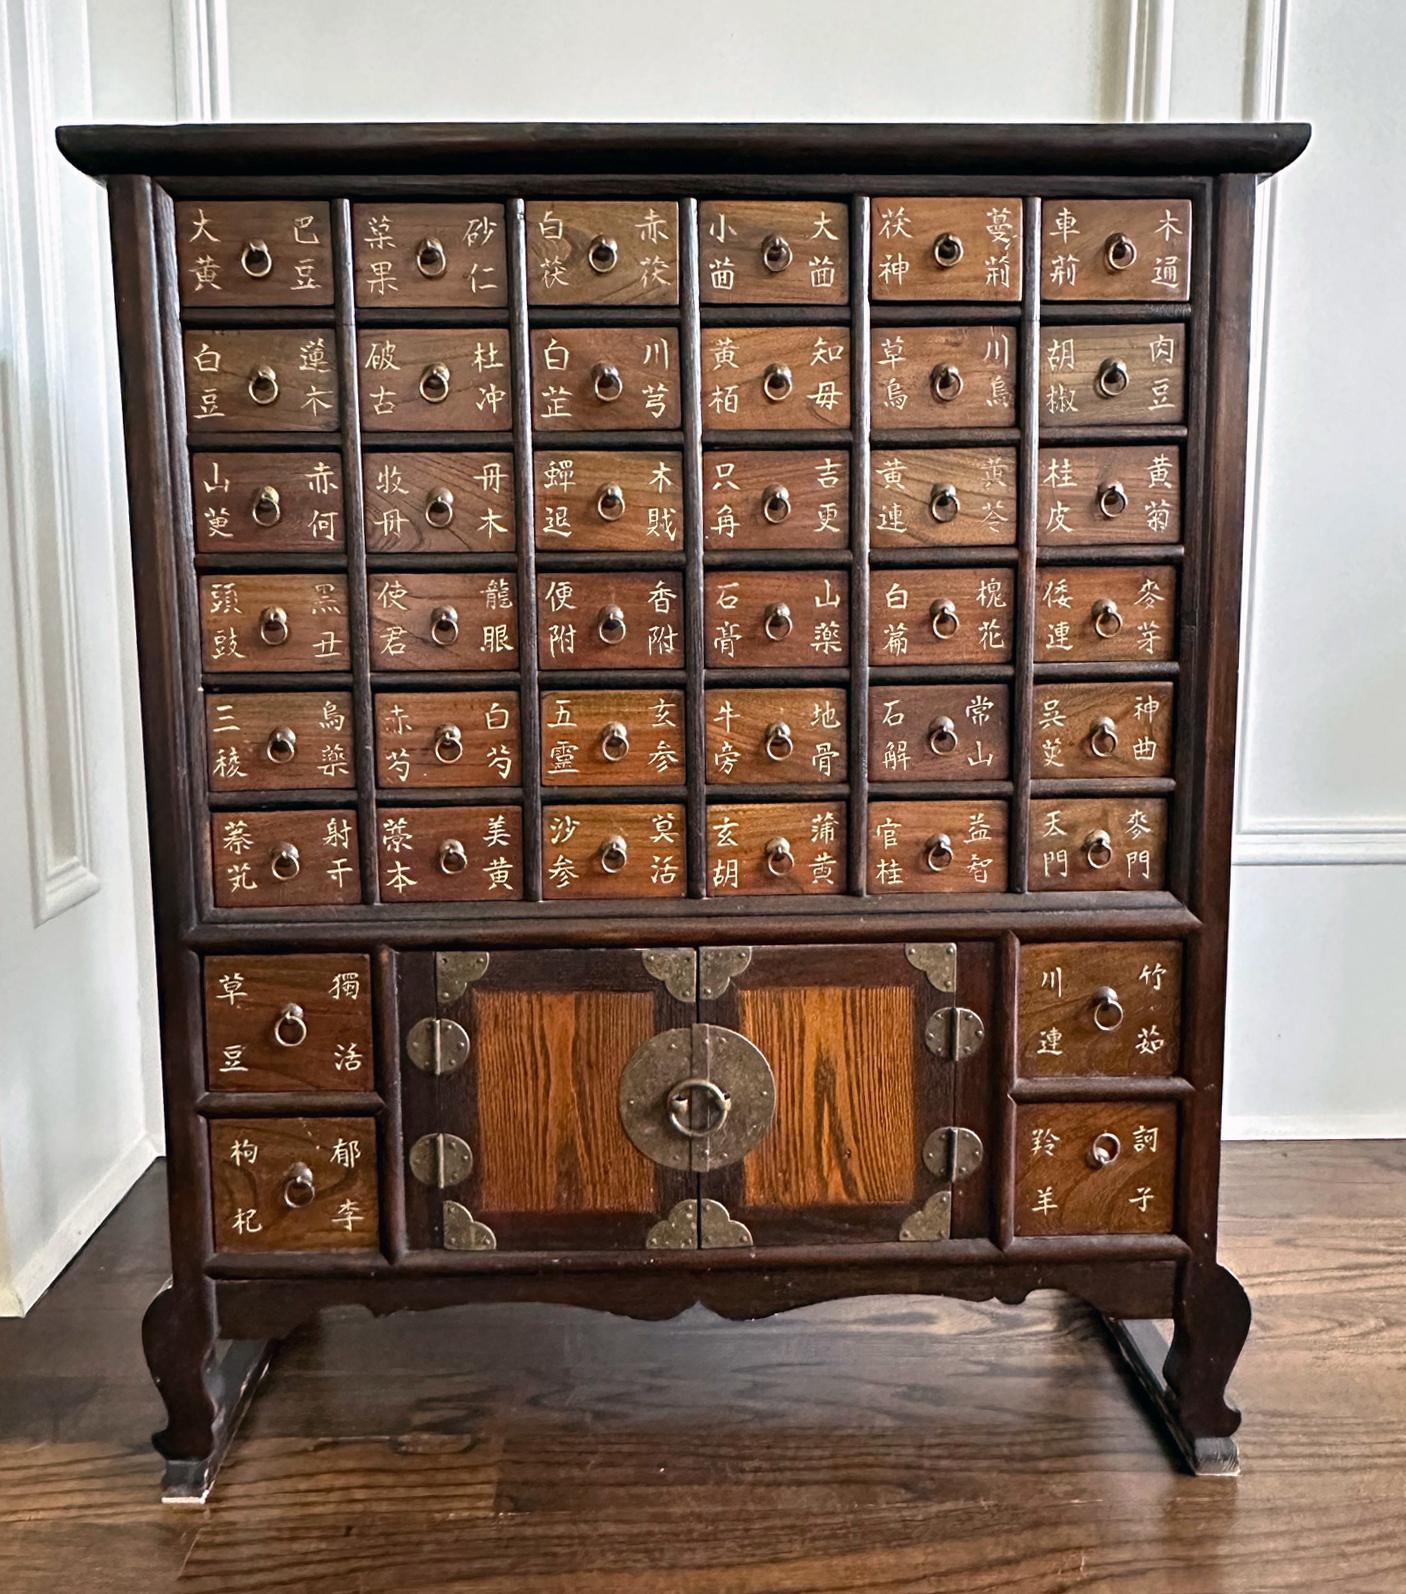 A Korean medicine or apothecary chest with curved leg support circa the first quarter of the 20th century. Known as Yakchang in Korea, the chest was used to sort and store herb medicines in its many small drawers. The prototype was originated in